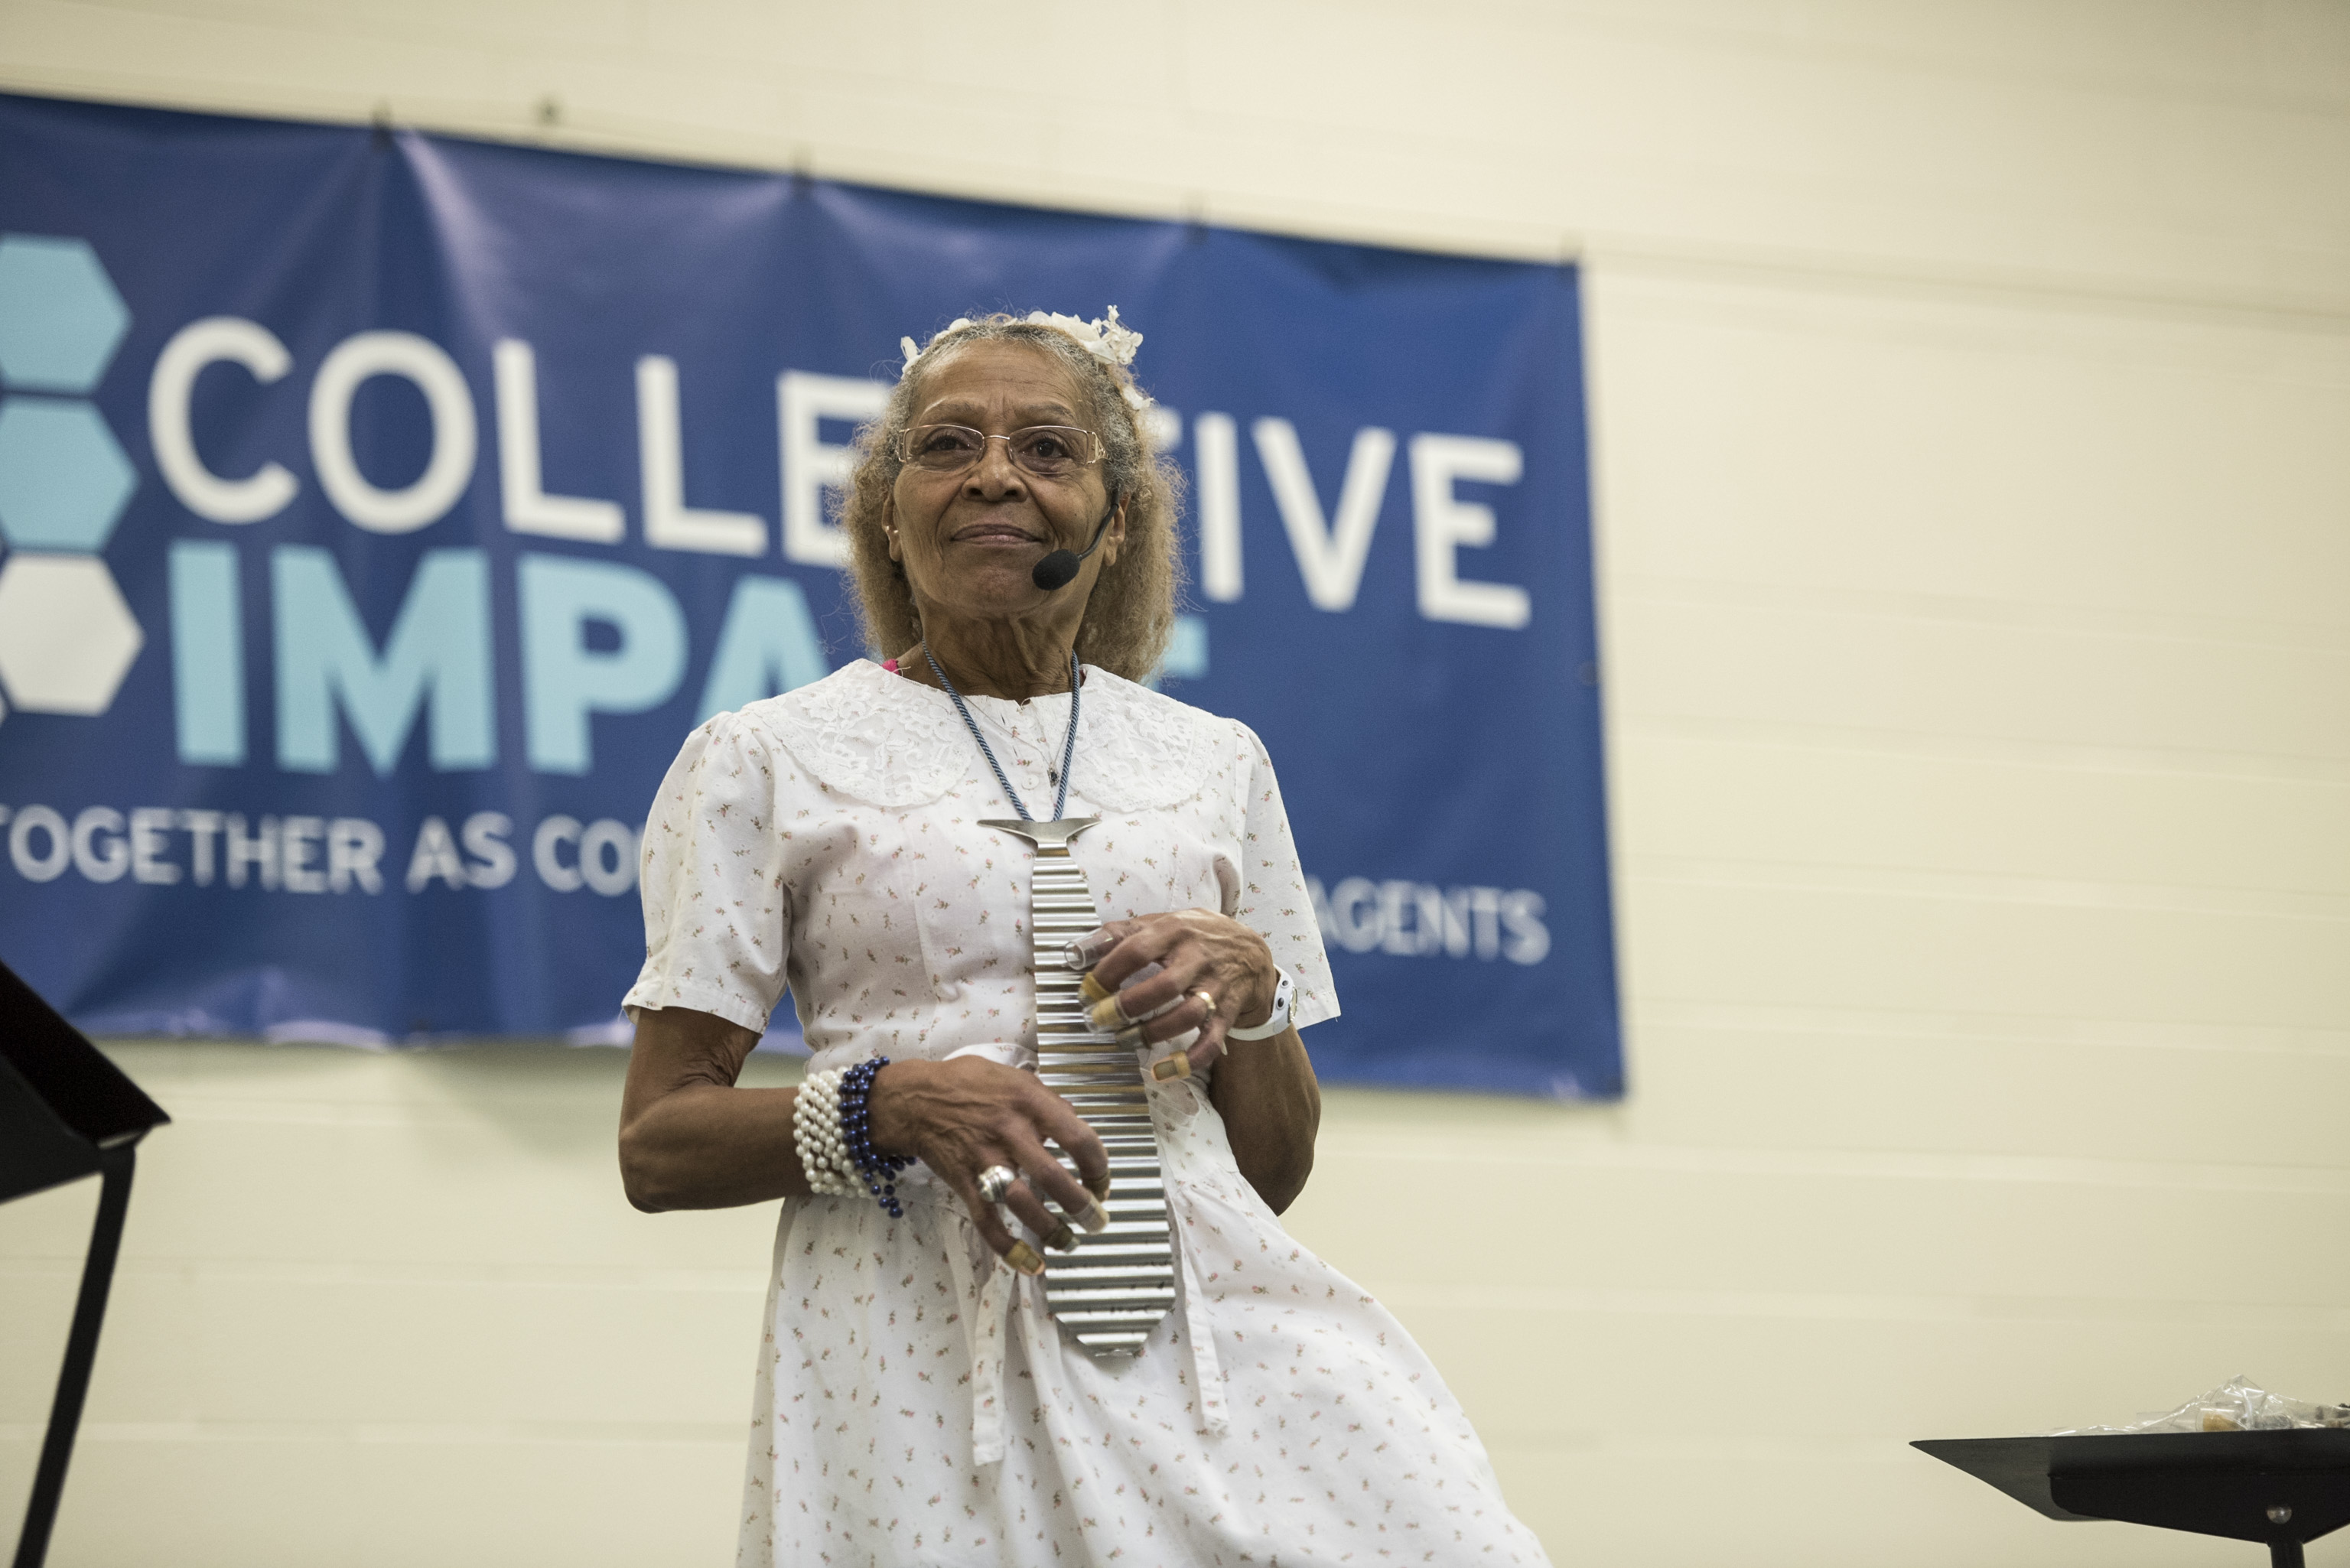 Mississippi Millie at the Collective Impact Conference 